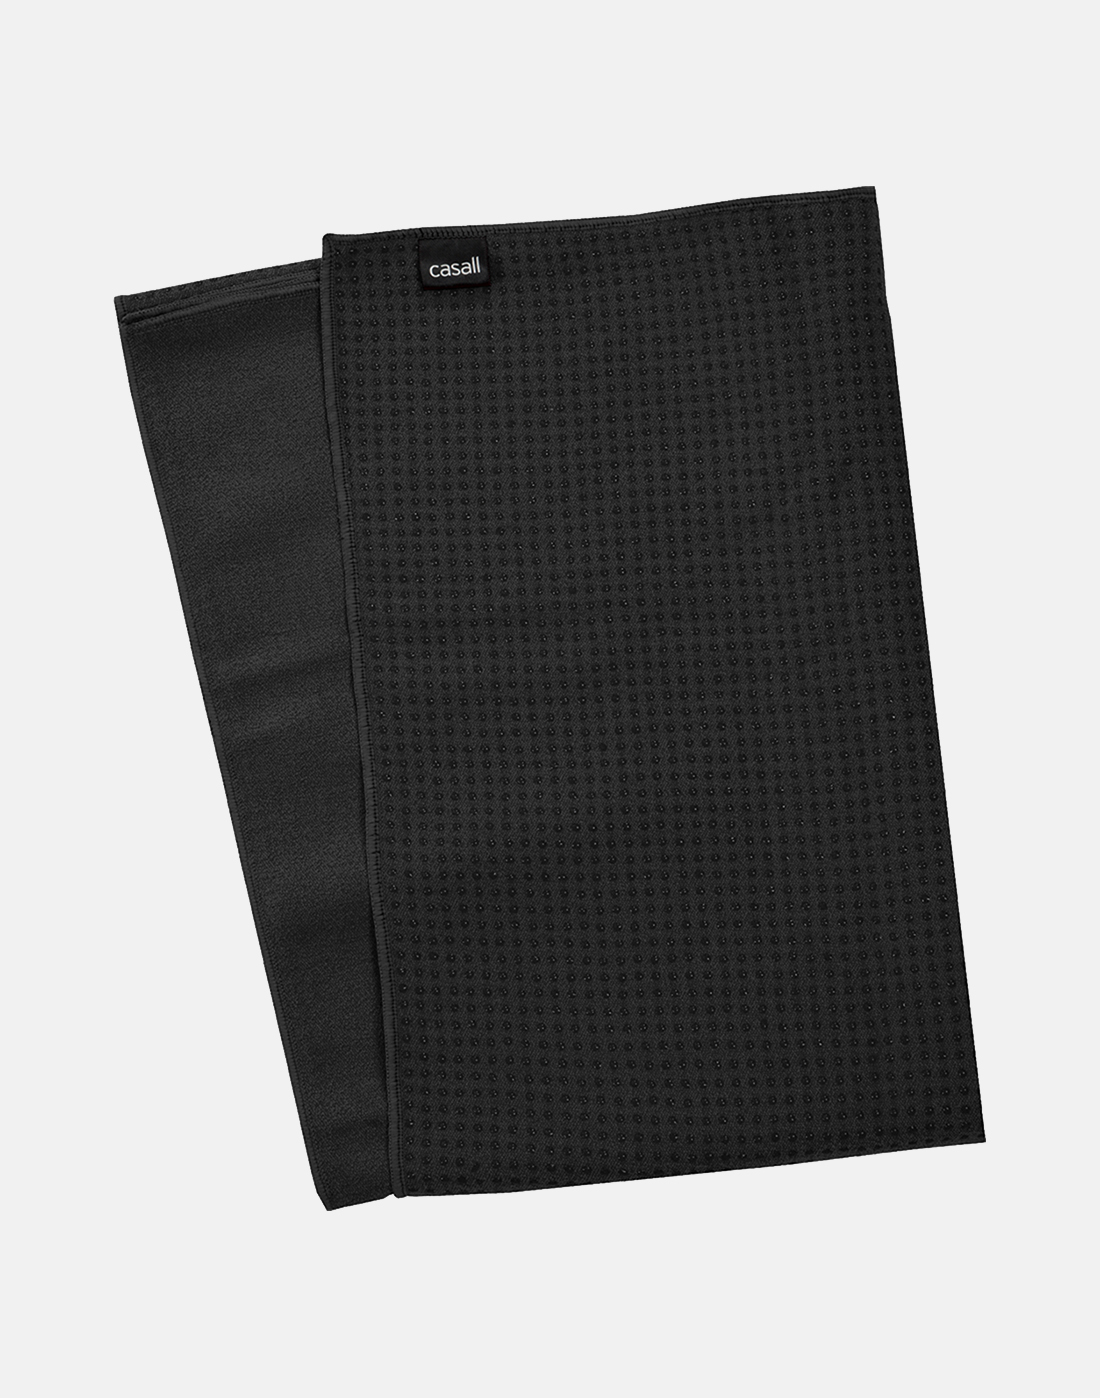 Casall Yoga Towel - Black | Life Style Sports IE